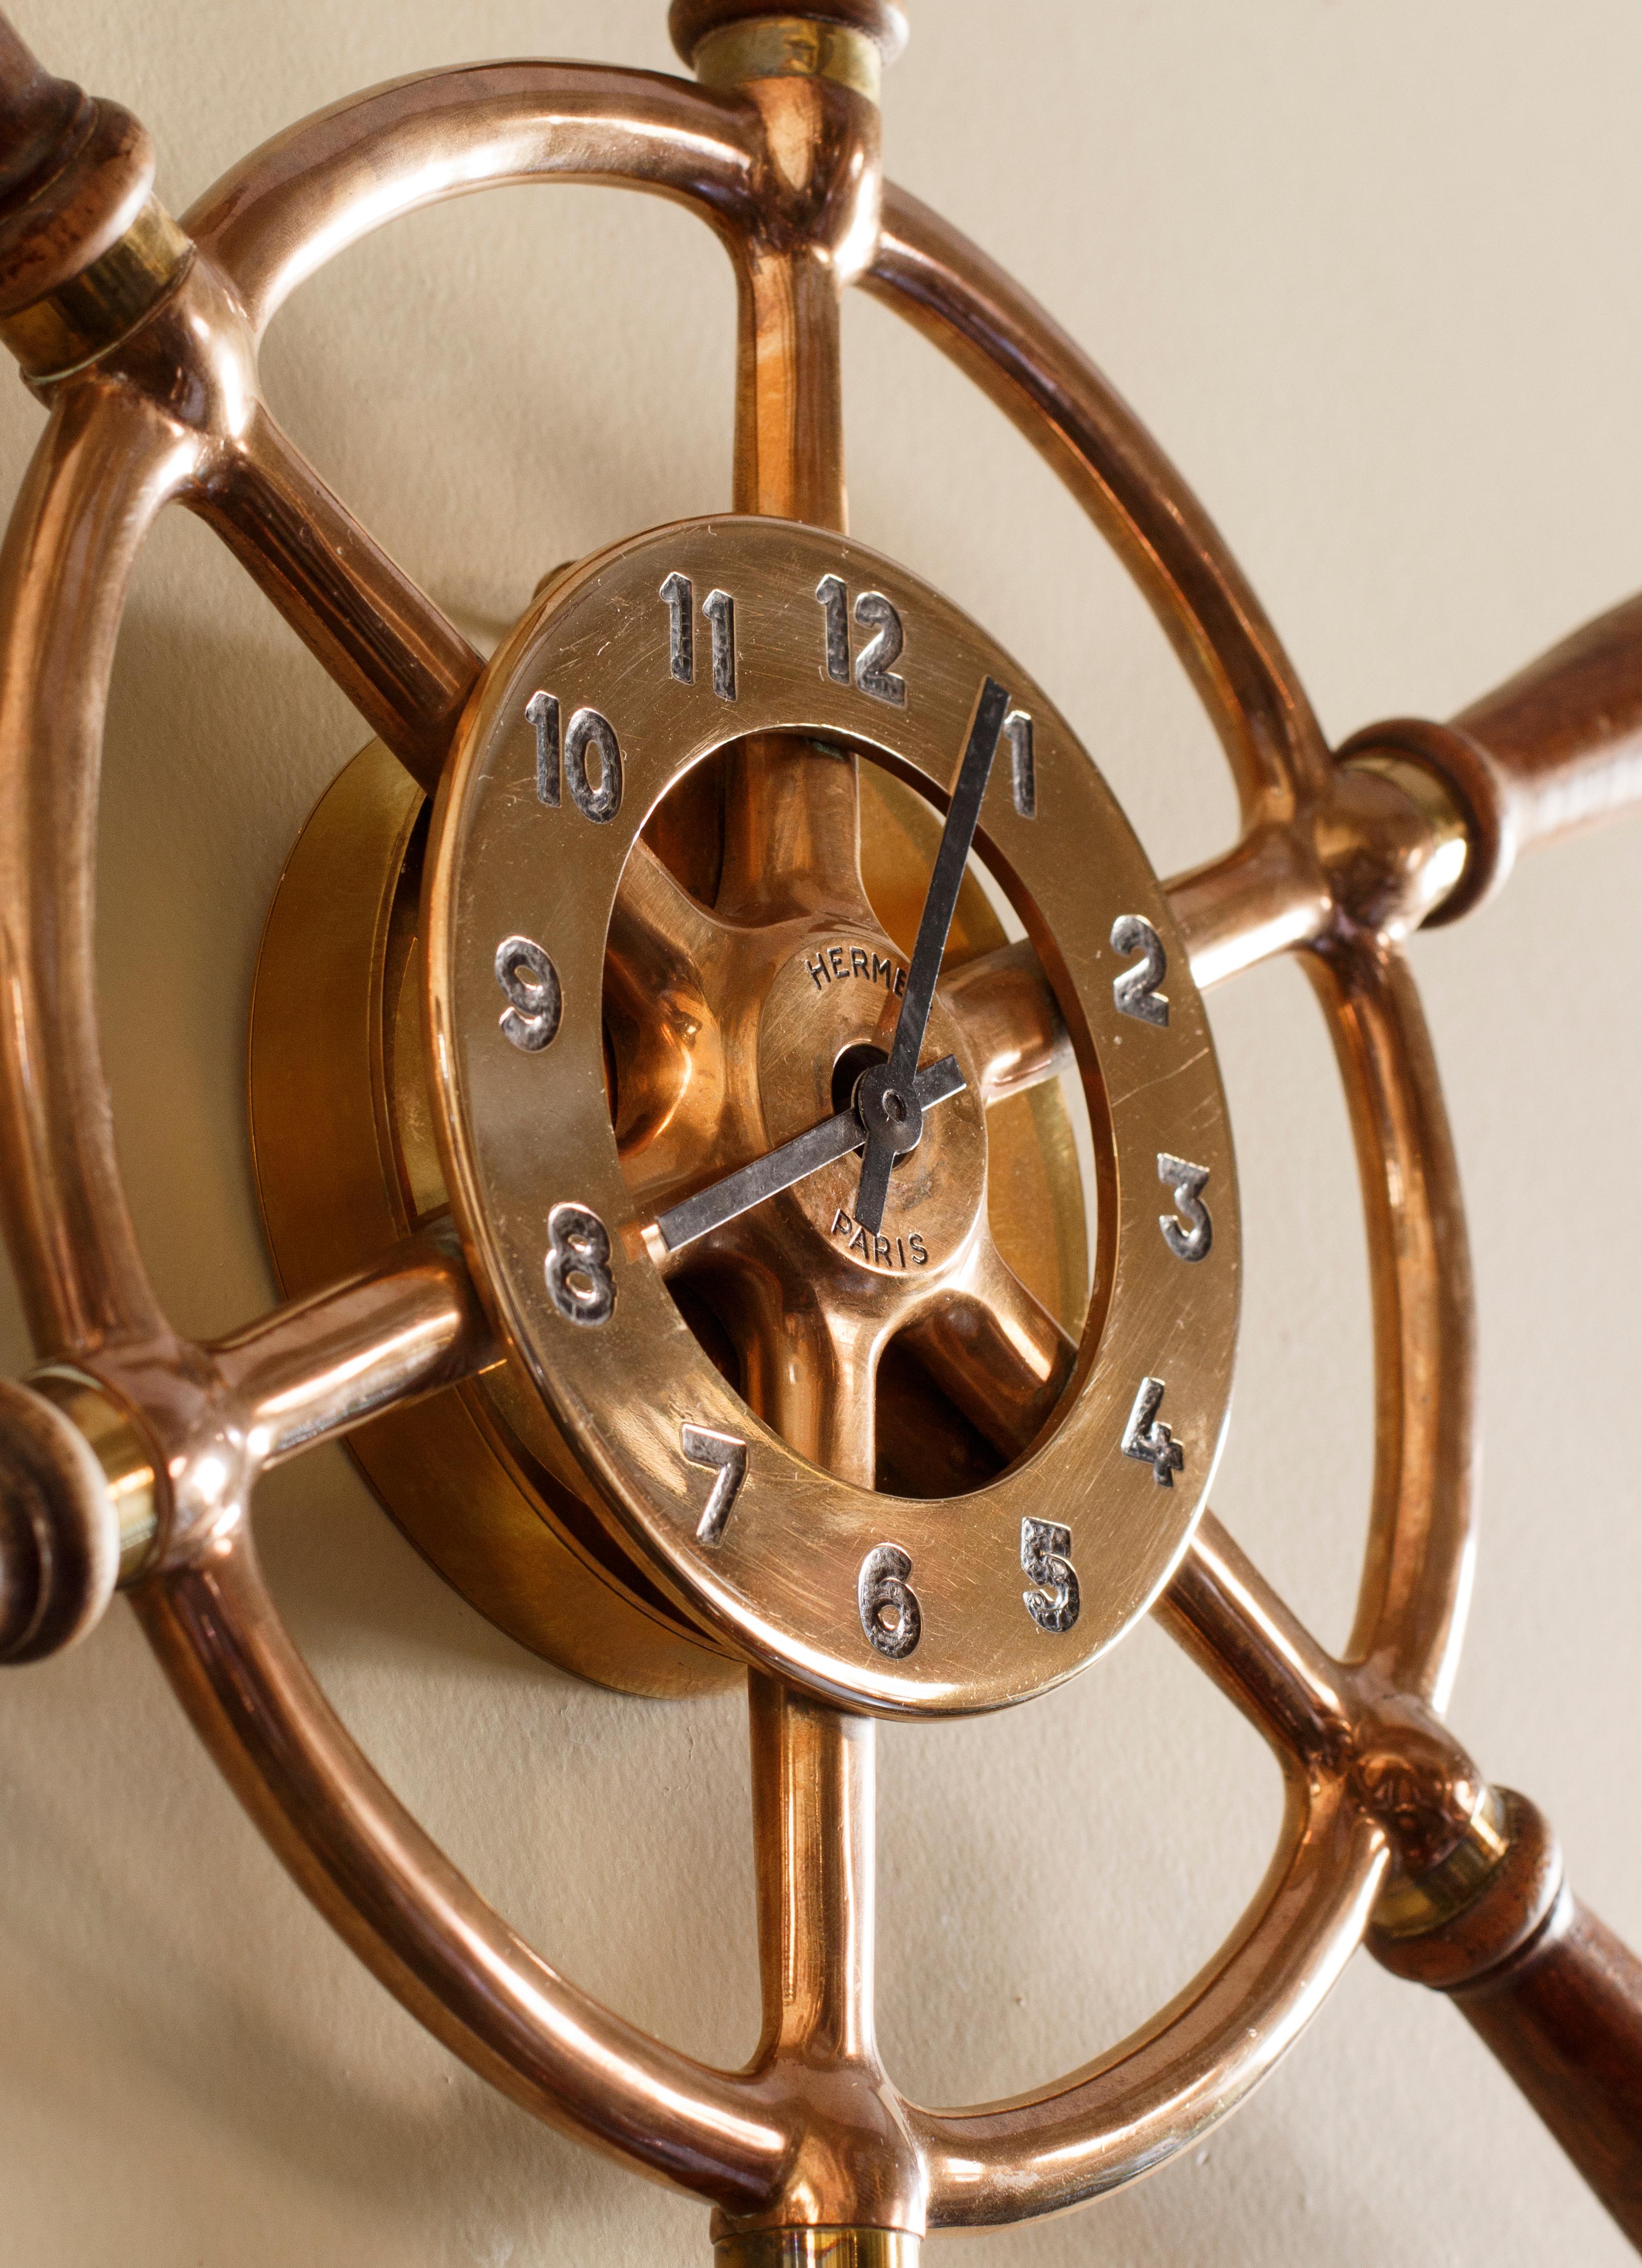 Rare and original vintage Hermes Paris “Gouvernail” ship’s wheel wall clock. The clock encases an 8-day mechanical movement, made probably by Jaeger Lecoultre (usually all Hermes clocks used JLC movements).

Hermes introduced this clock in 1940's.